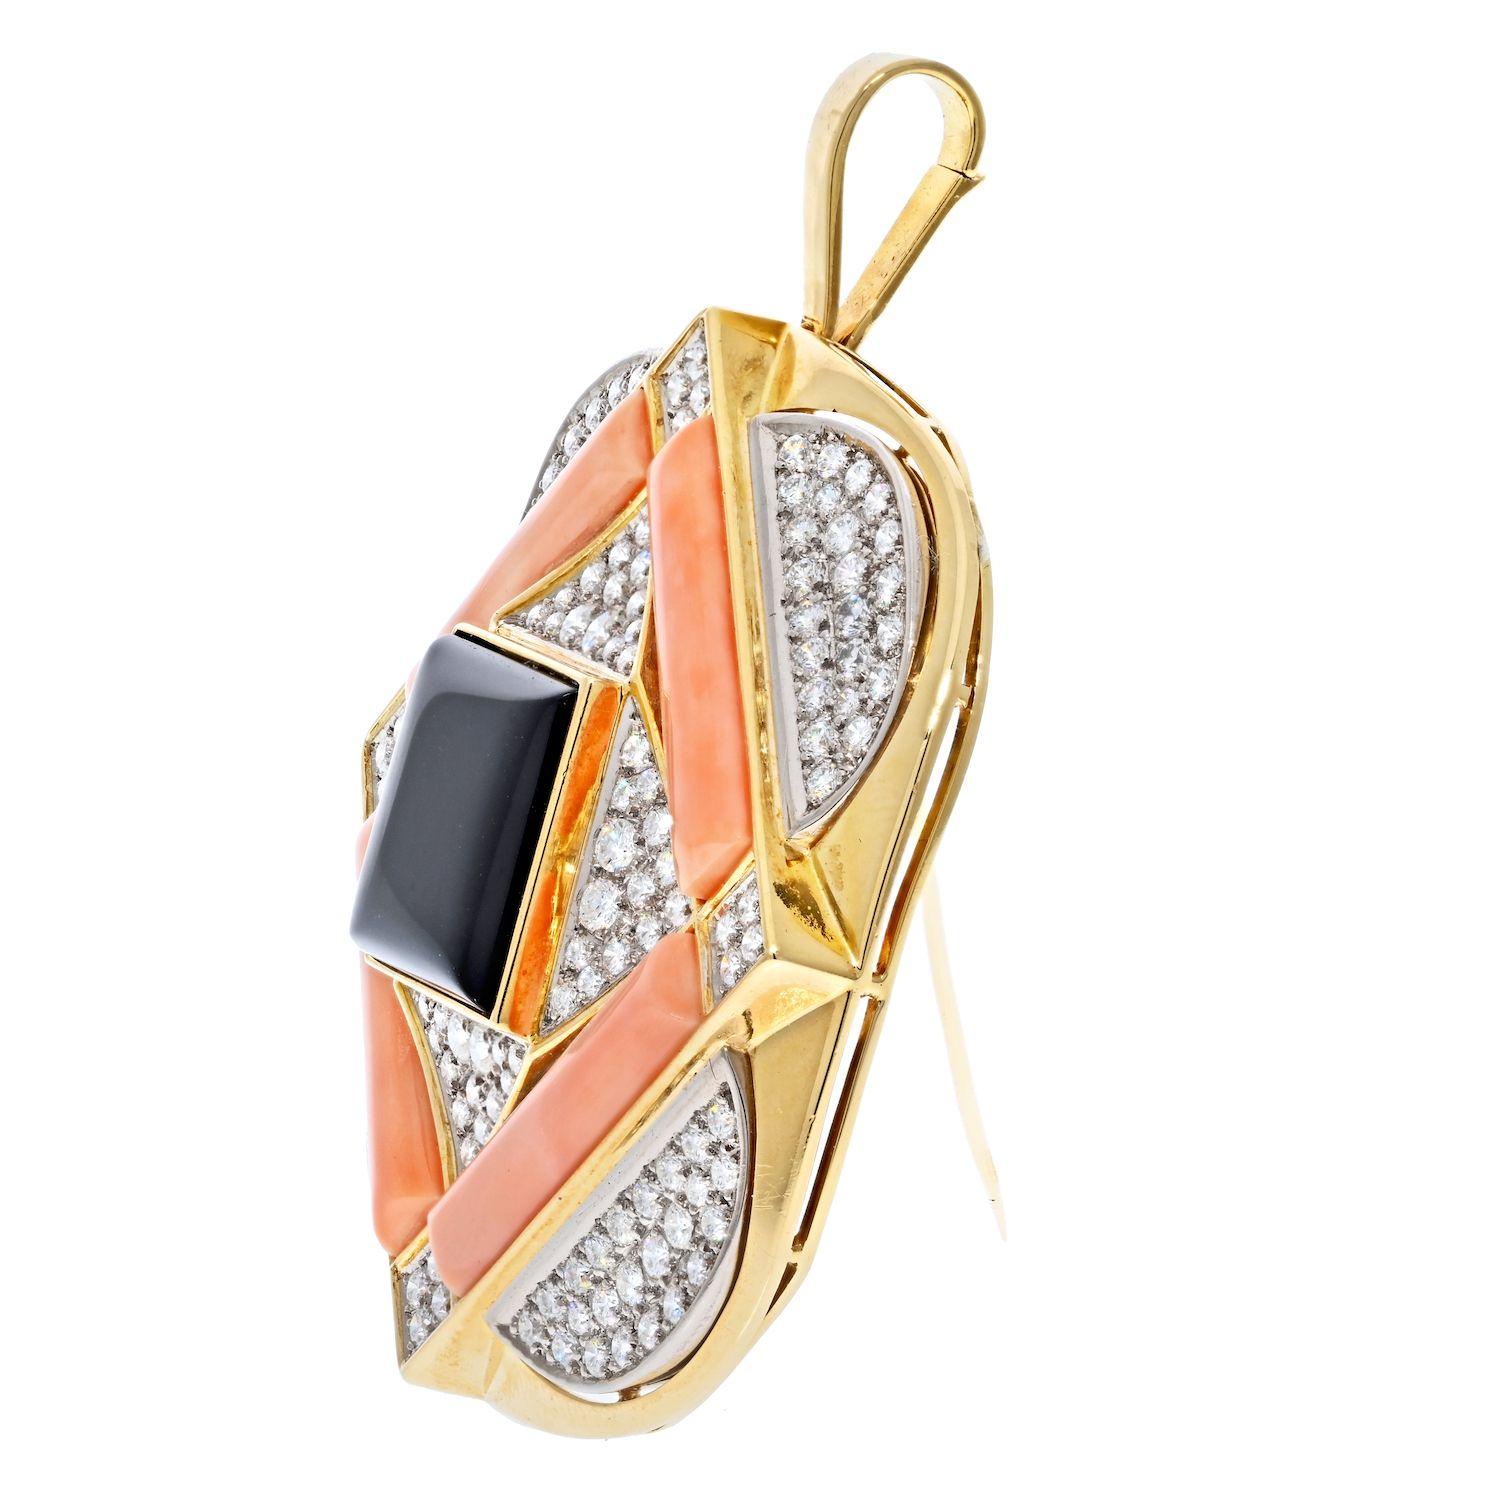 Round Cut Vacheron Constantin 18K Yellow Gold 1970's Coral, Diamond And Onyx Pendant Brooch For Sale